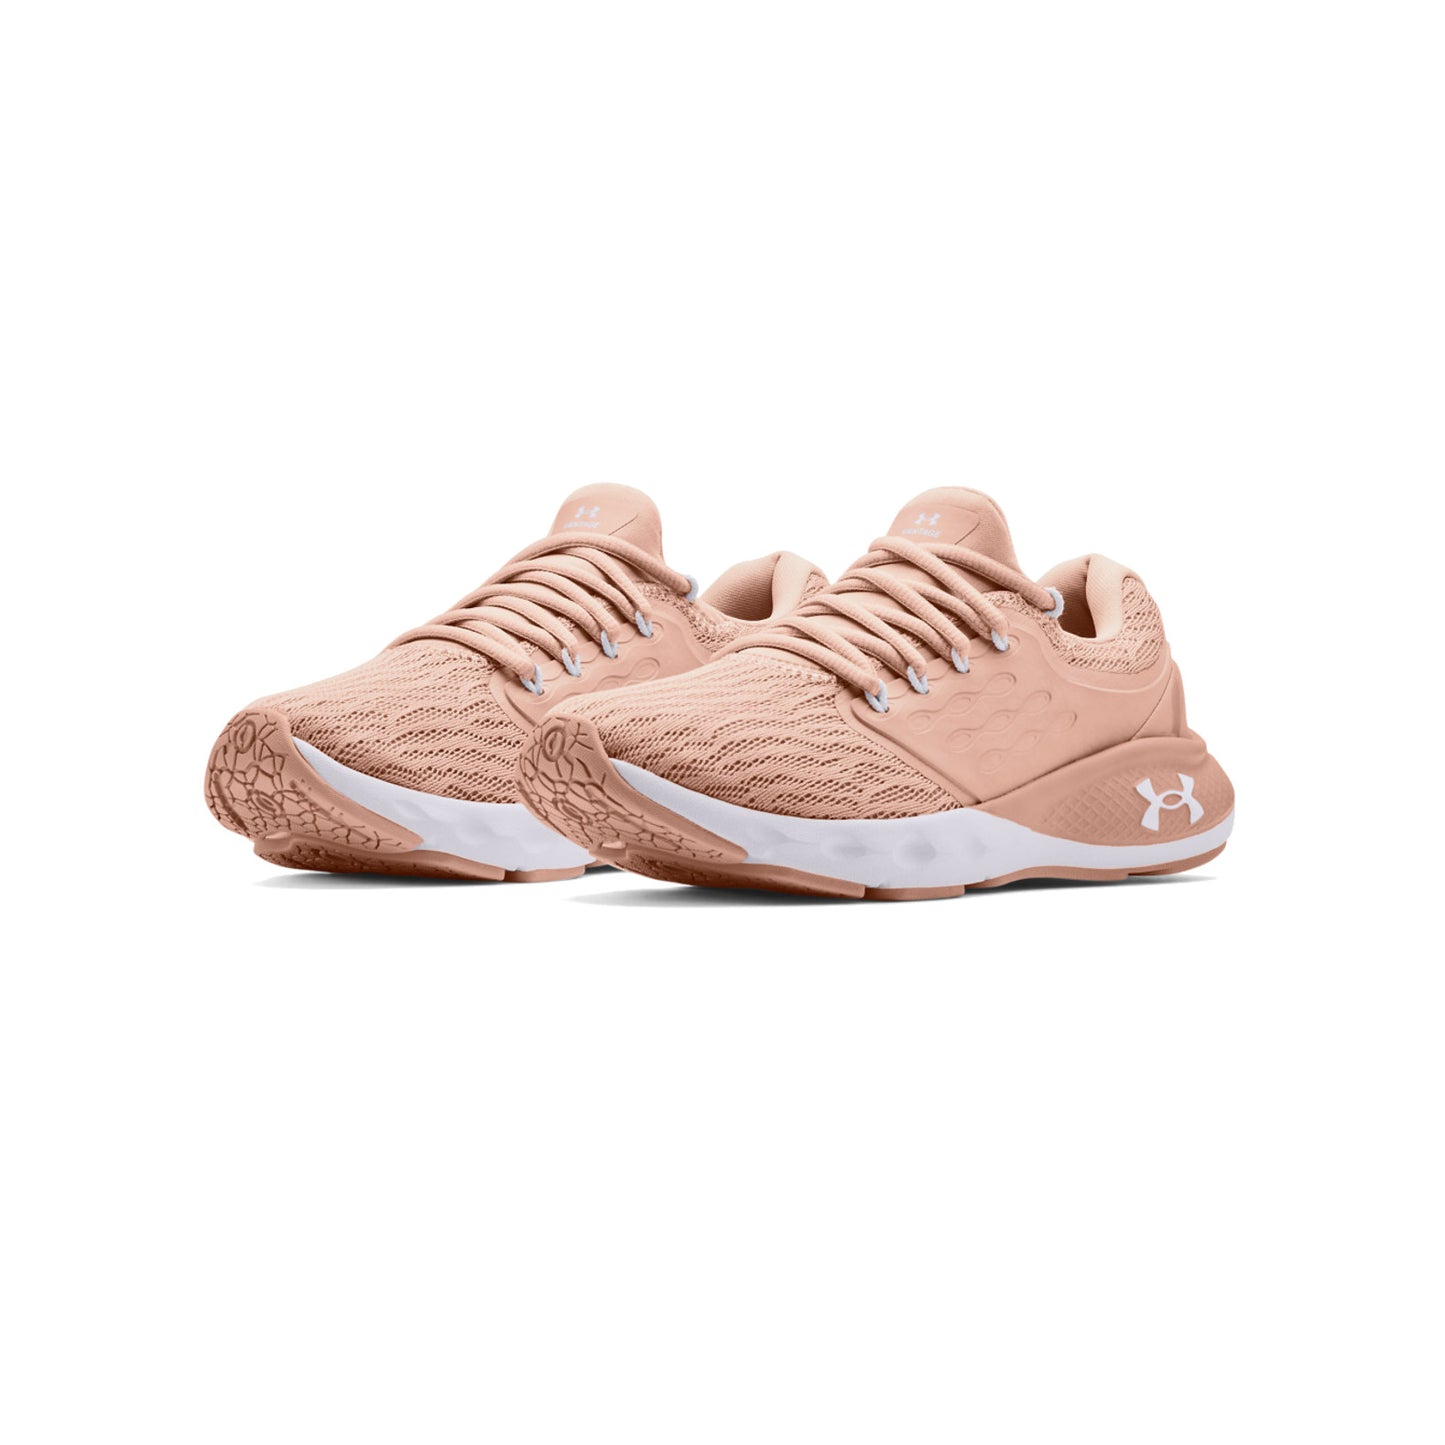 Women's Charged Vantage Pink/White (size US 11)